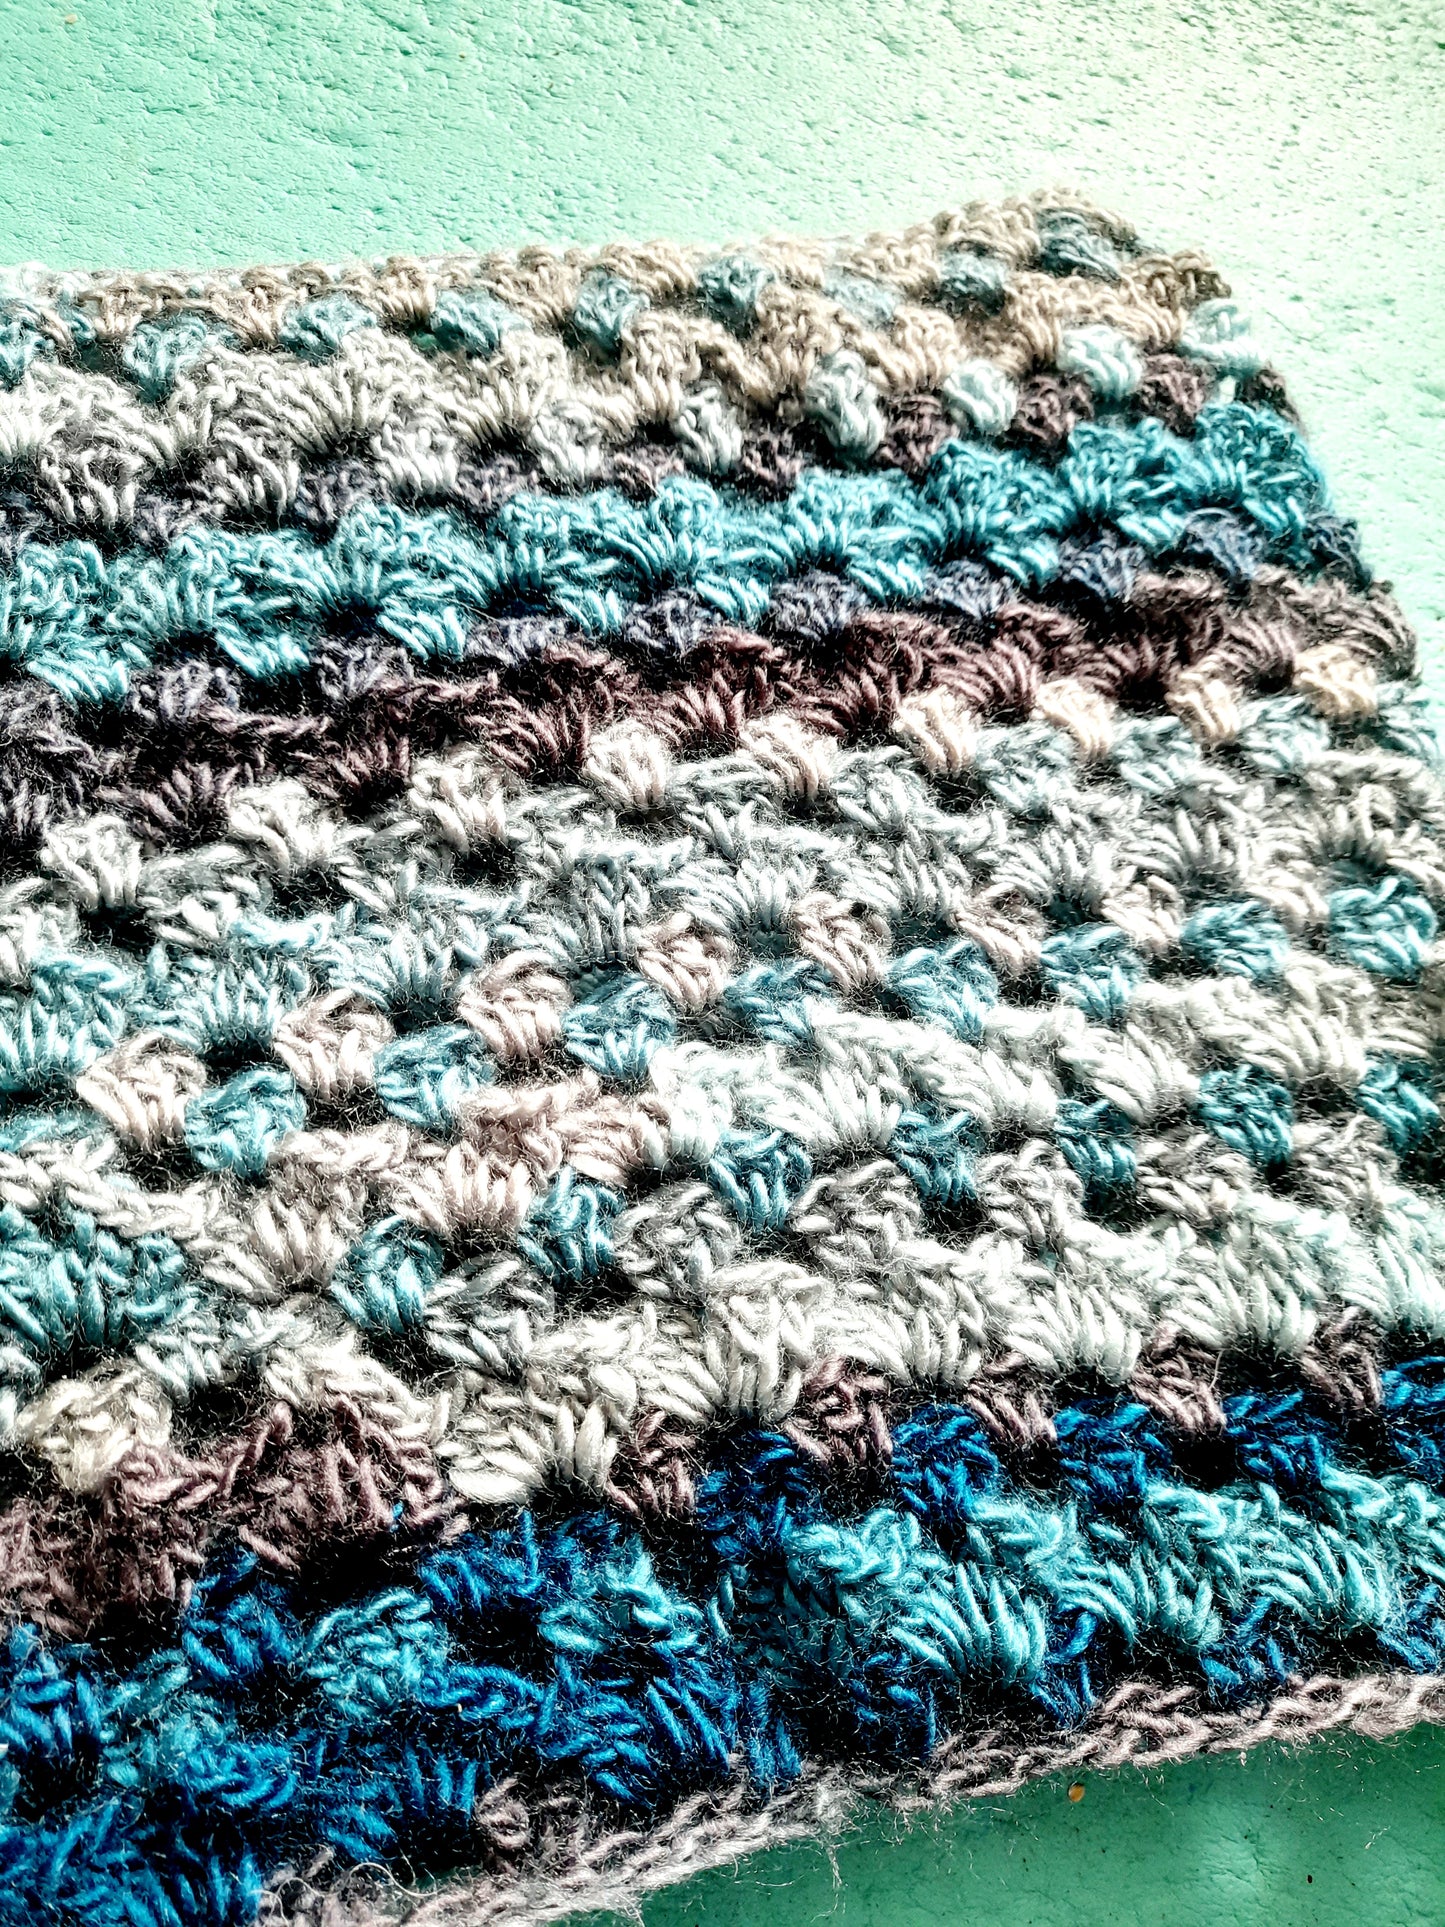 Song of the sea snood crochet pattern.